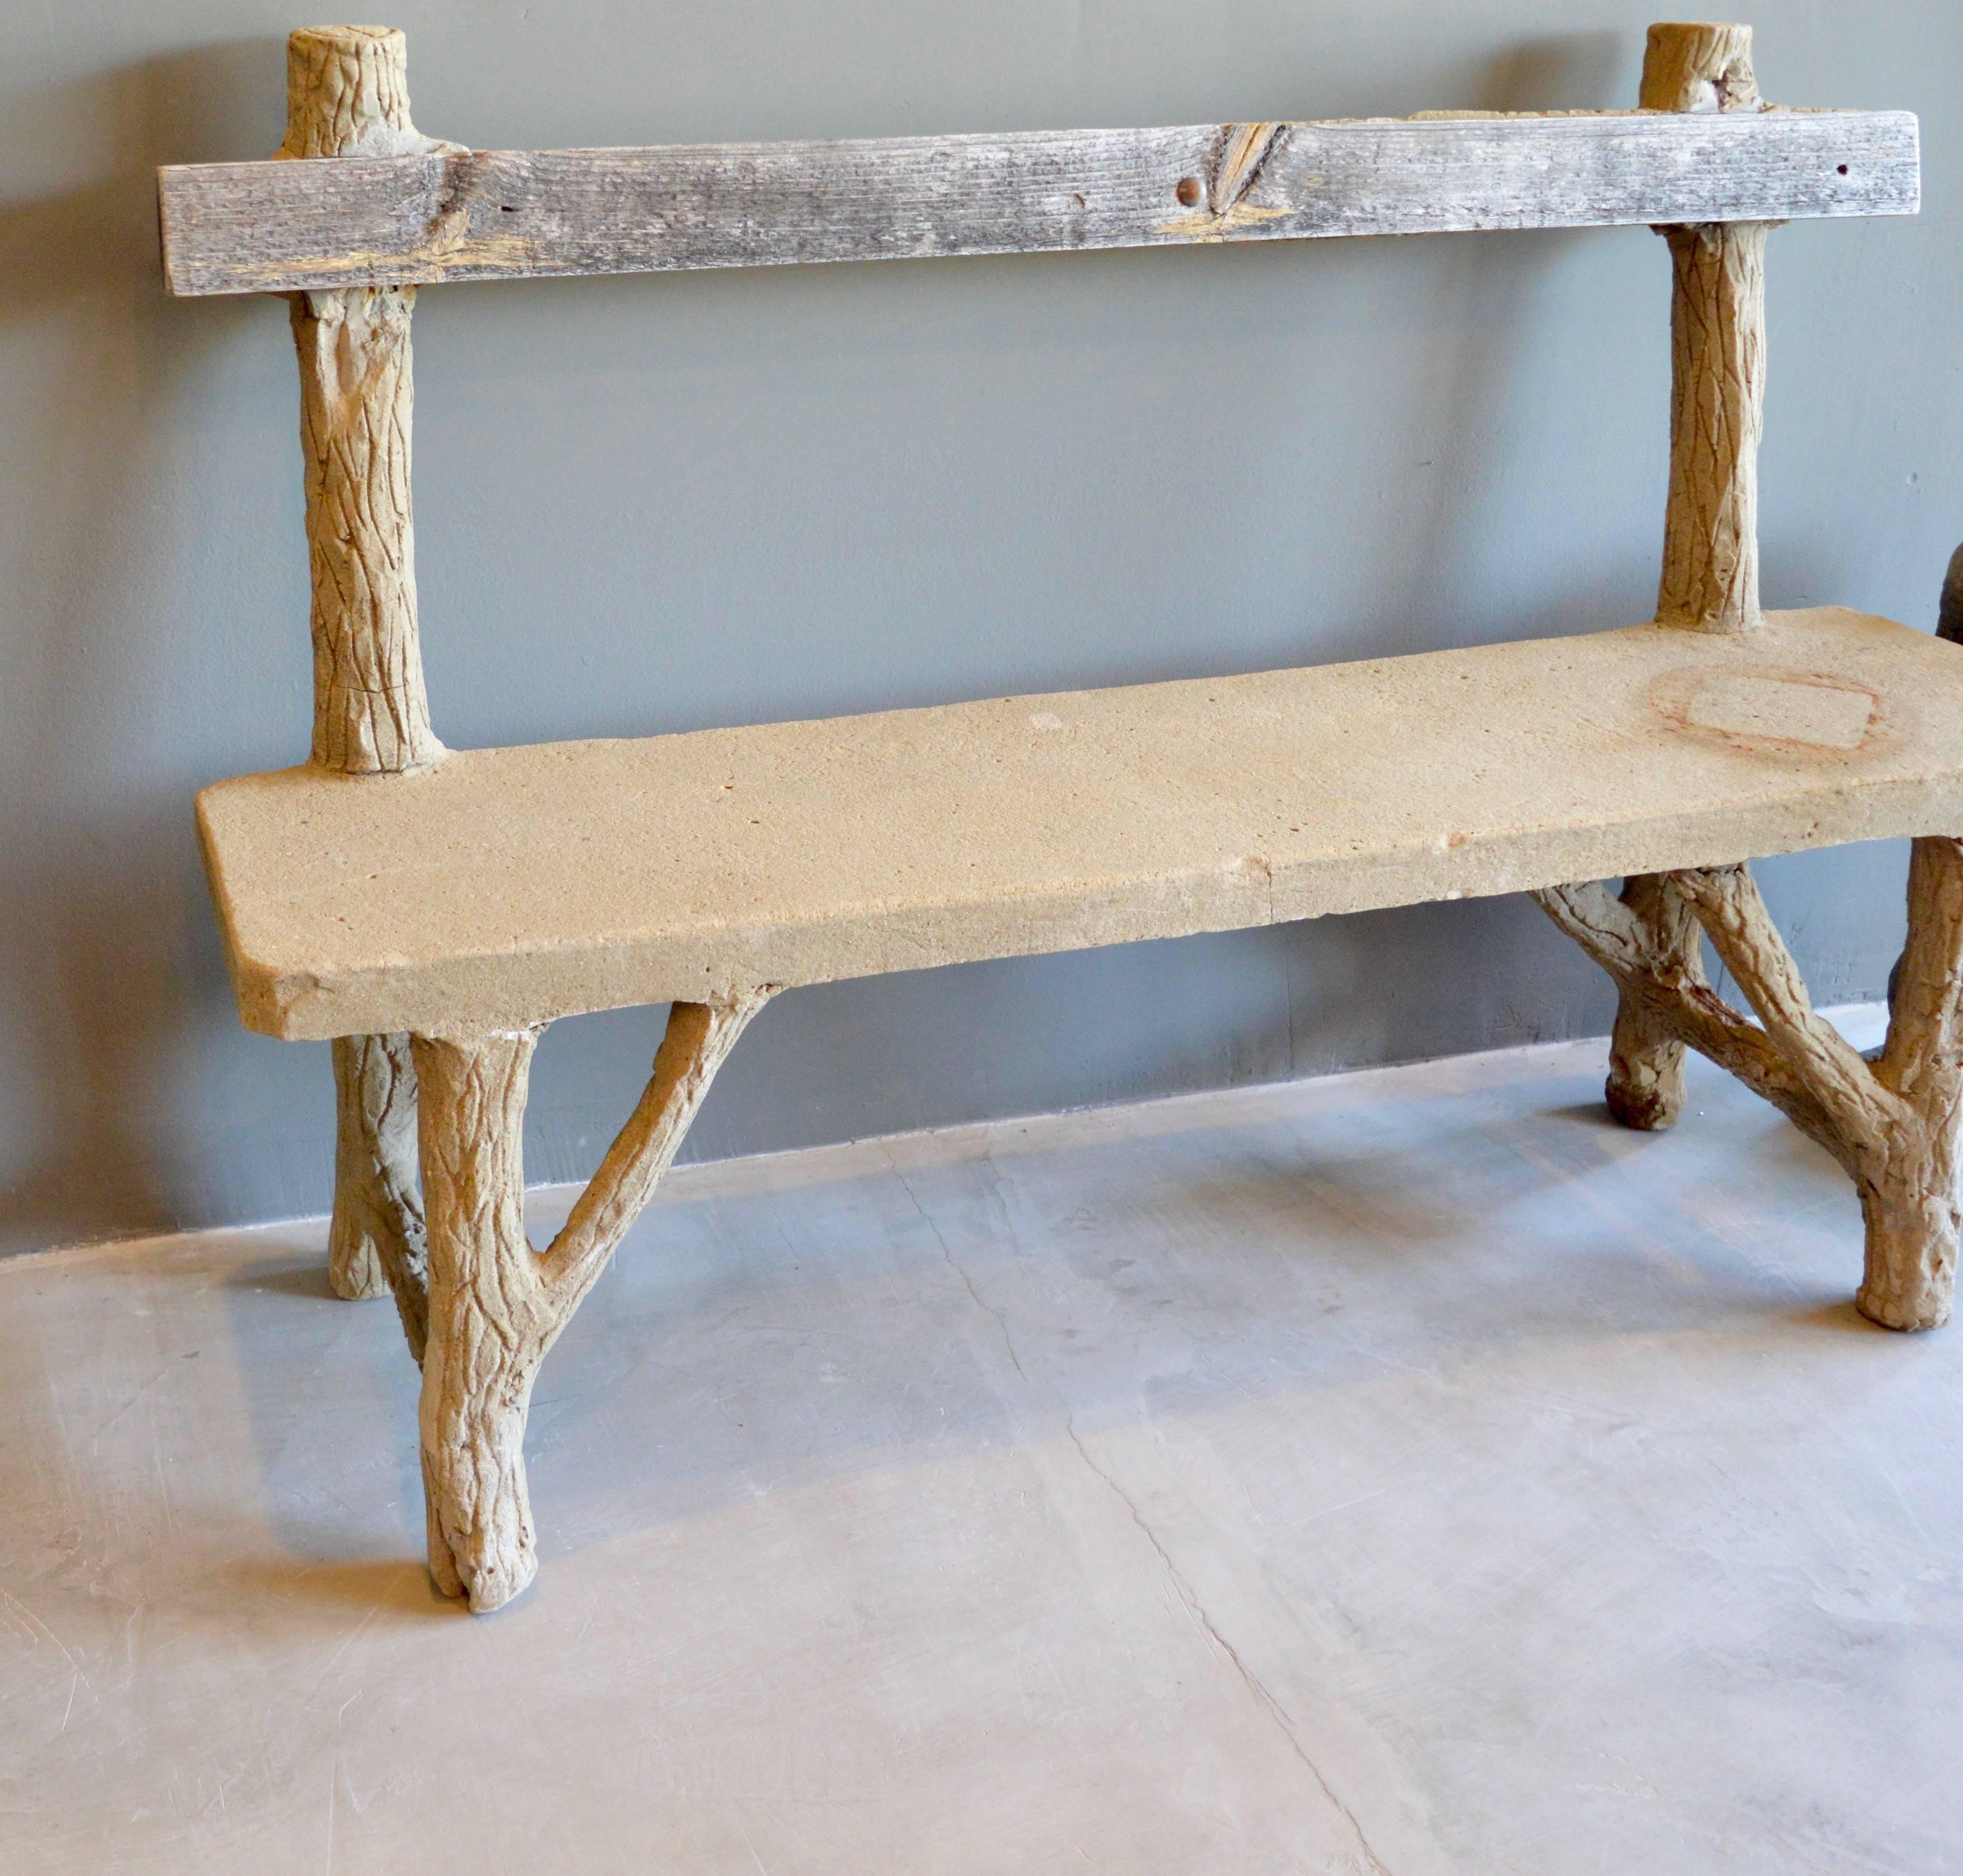 Fantastic concrete Folk Art bench. Entire bench is made of concrete except one wood plank backrest. Frame simulates wood logs with a flat slab seat. Some losses throughout. Very good vintage condition. Very unique piece. Great coloring. Perfect for